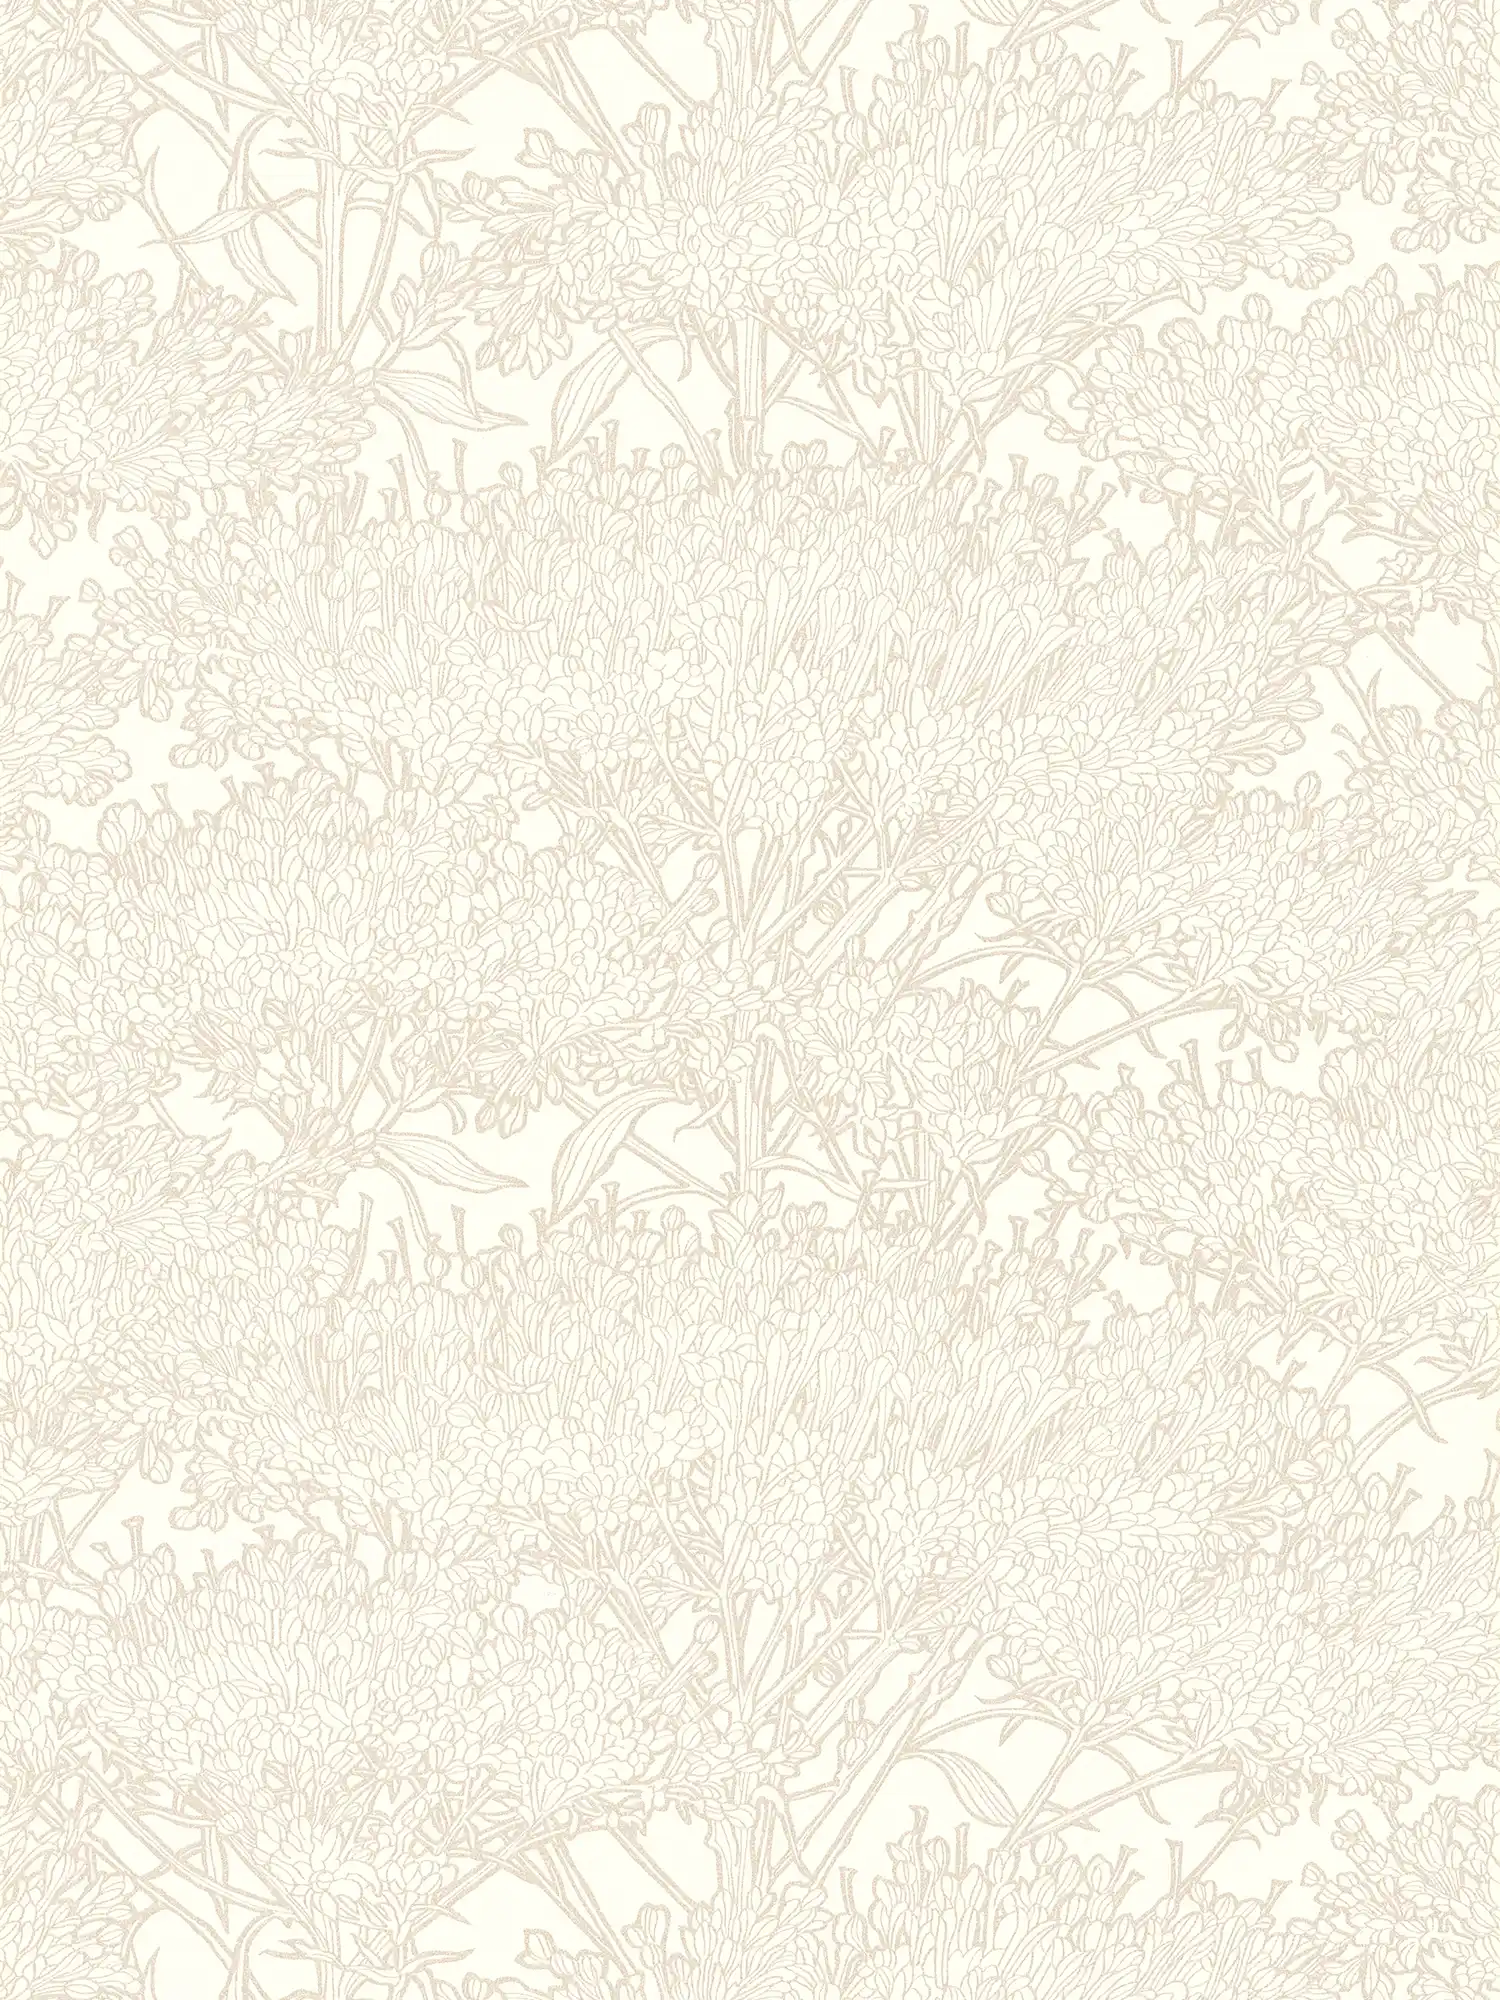 Wallpaper floral pattern with golden contours - cream, gold, grey
